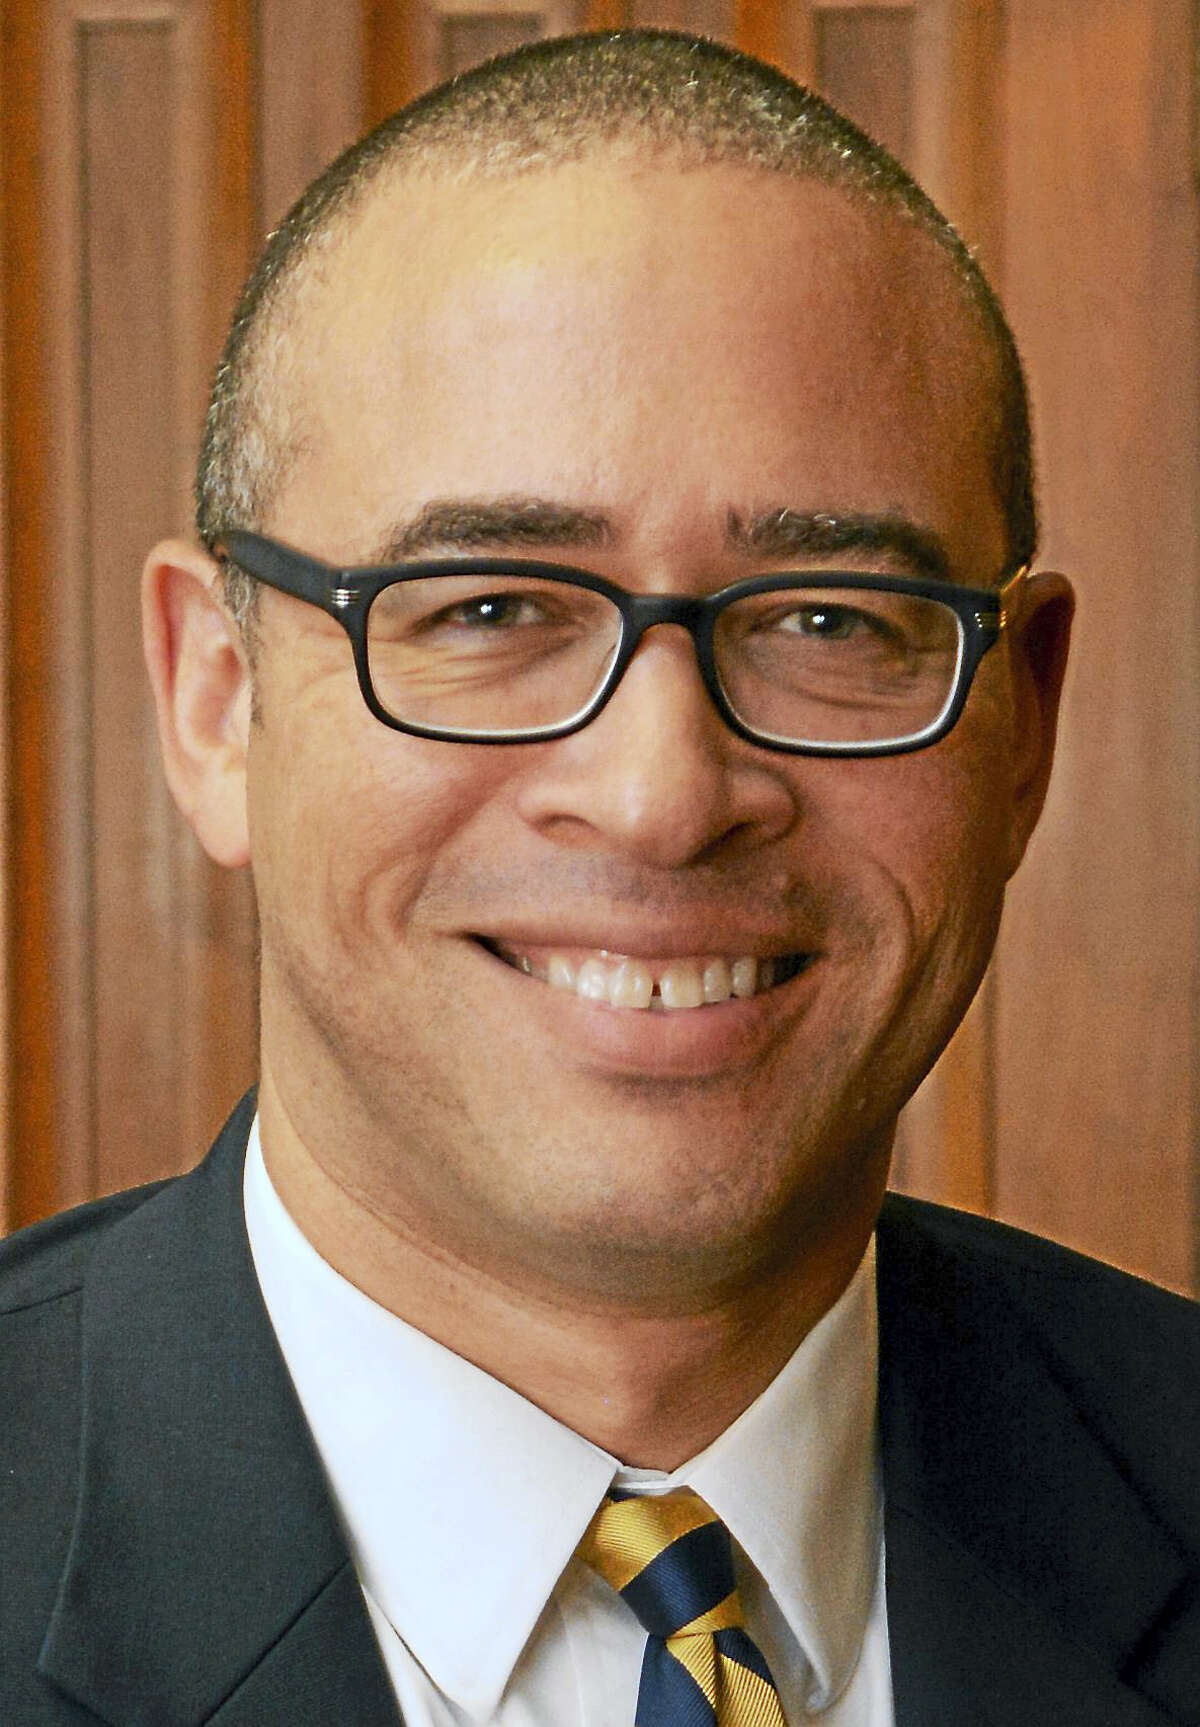 CONTRIBUTED PHOTOYale College Dean Jonathan Holloway